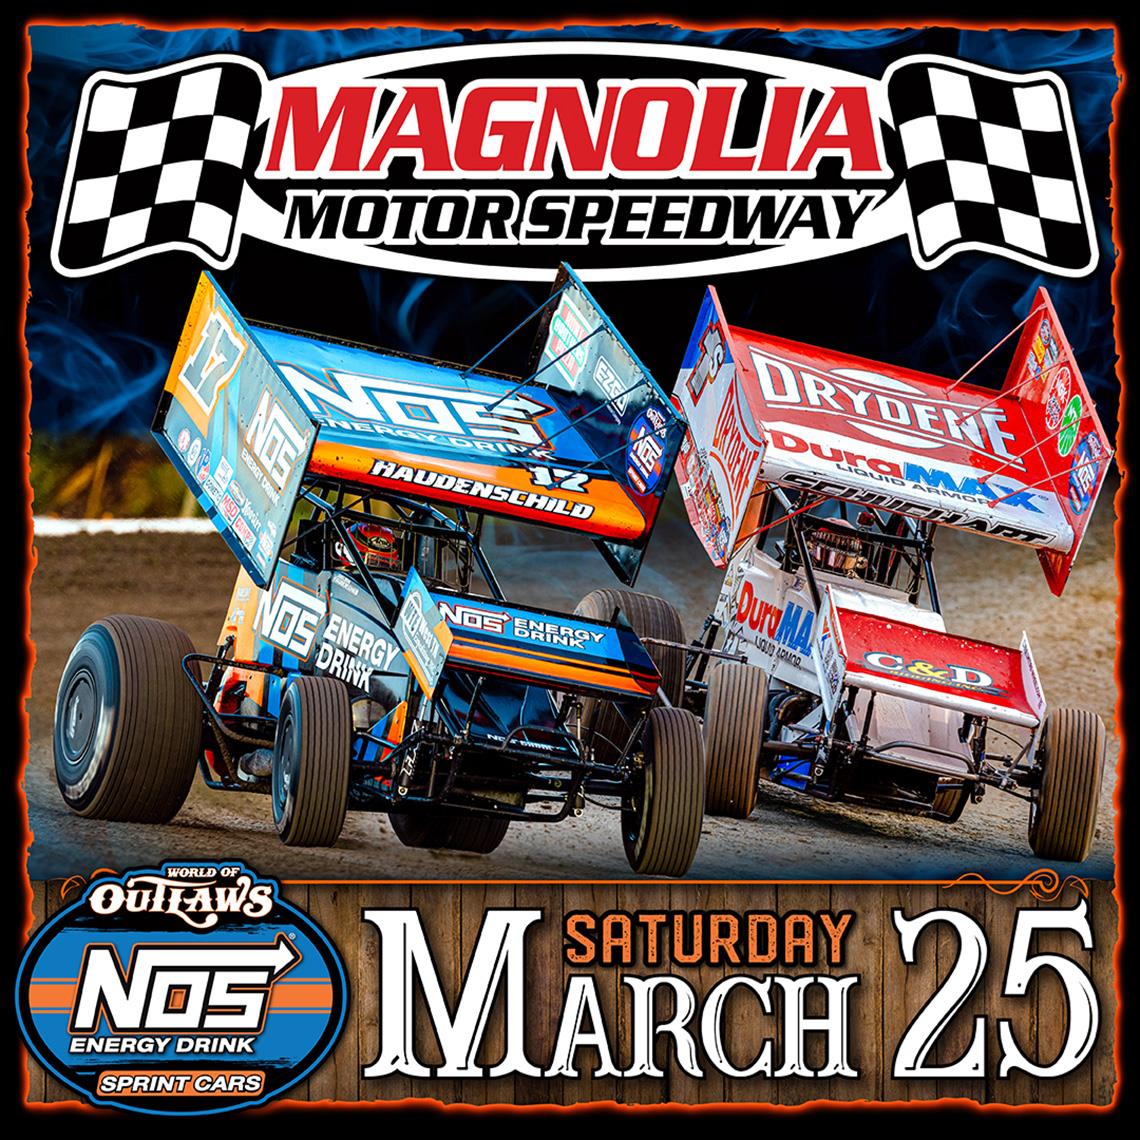 World of Outlaw Magnolia Tickets on Sale for March 25 Event